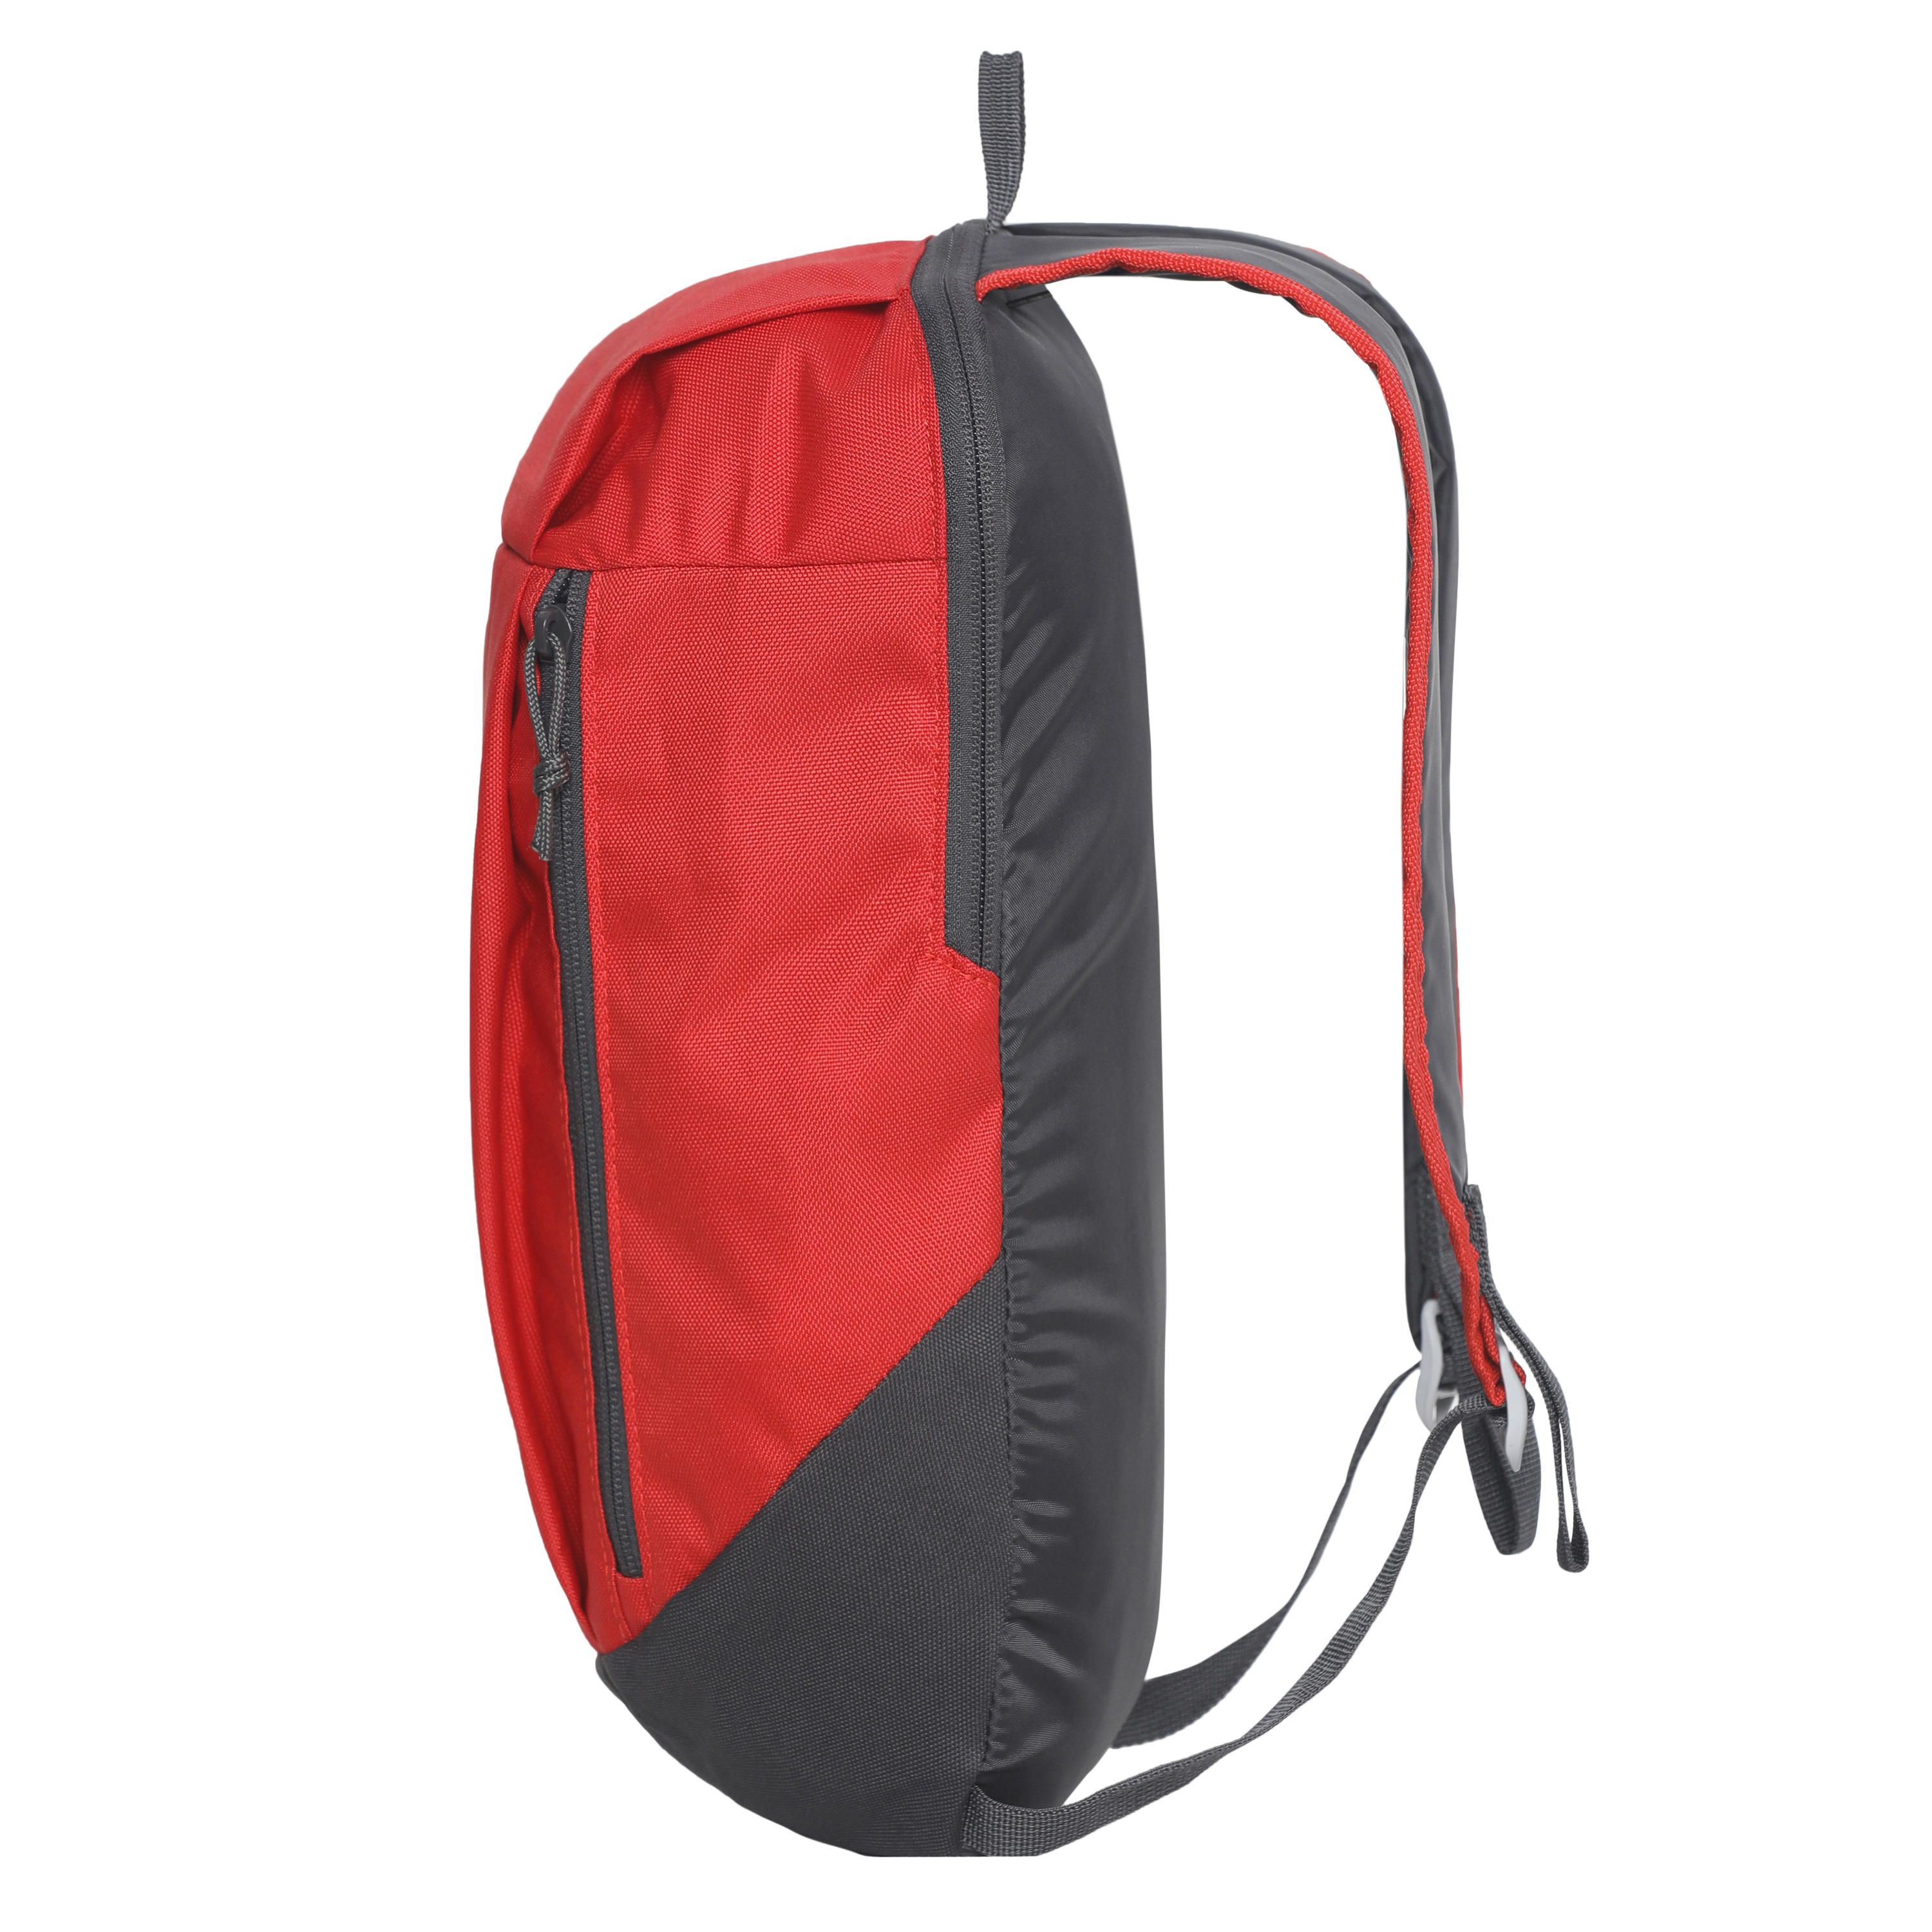 QUECHUA Hiking 10L Backpack - Arpenaz NH100